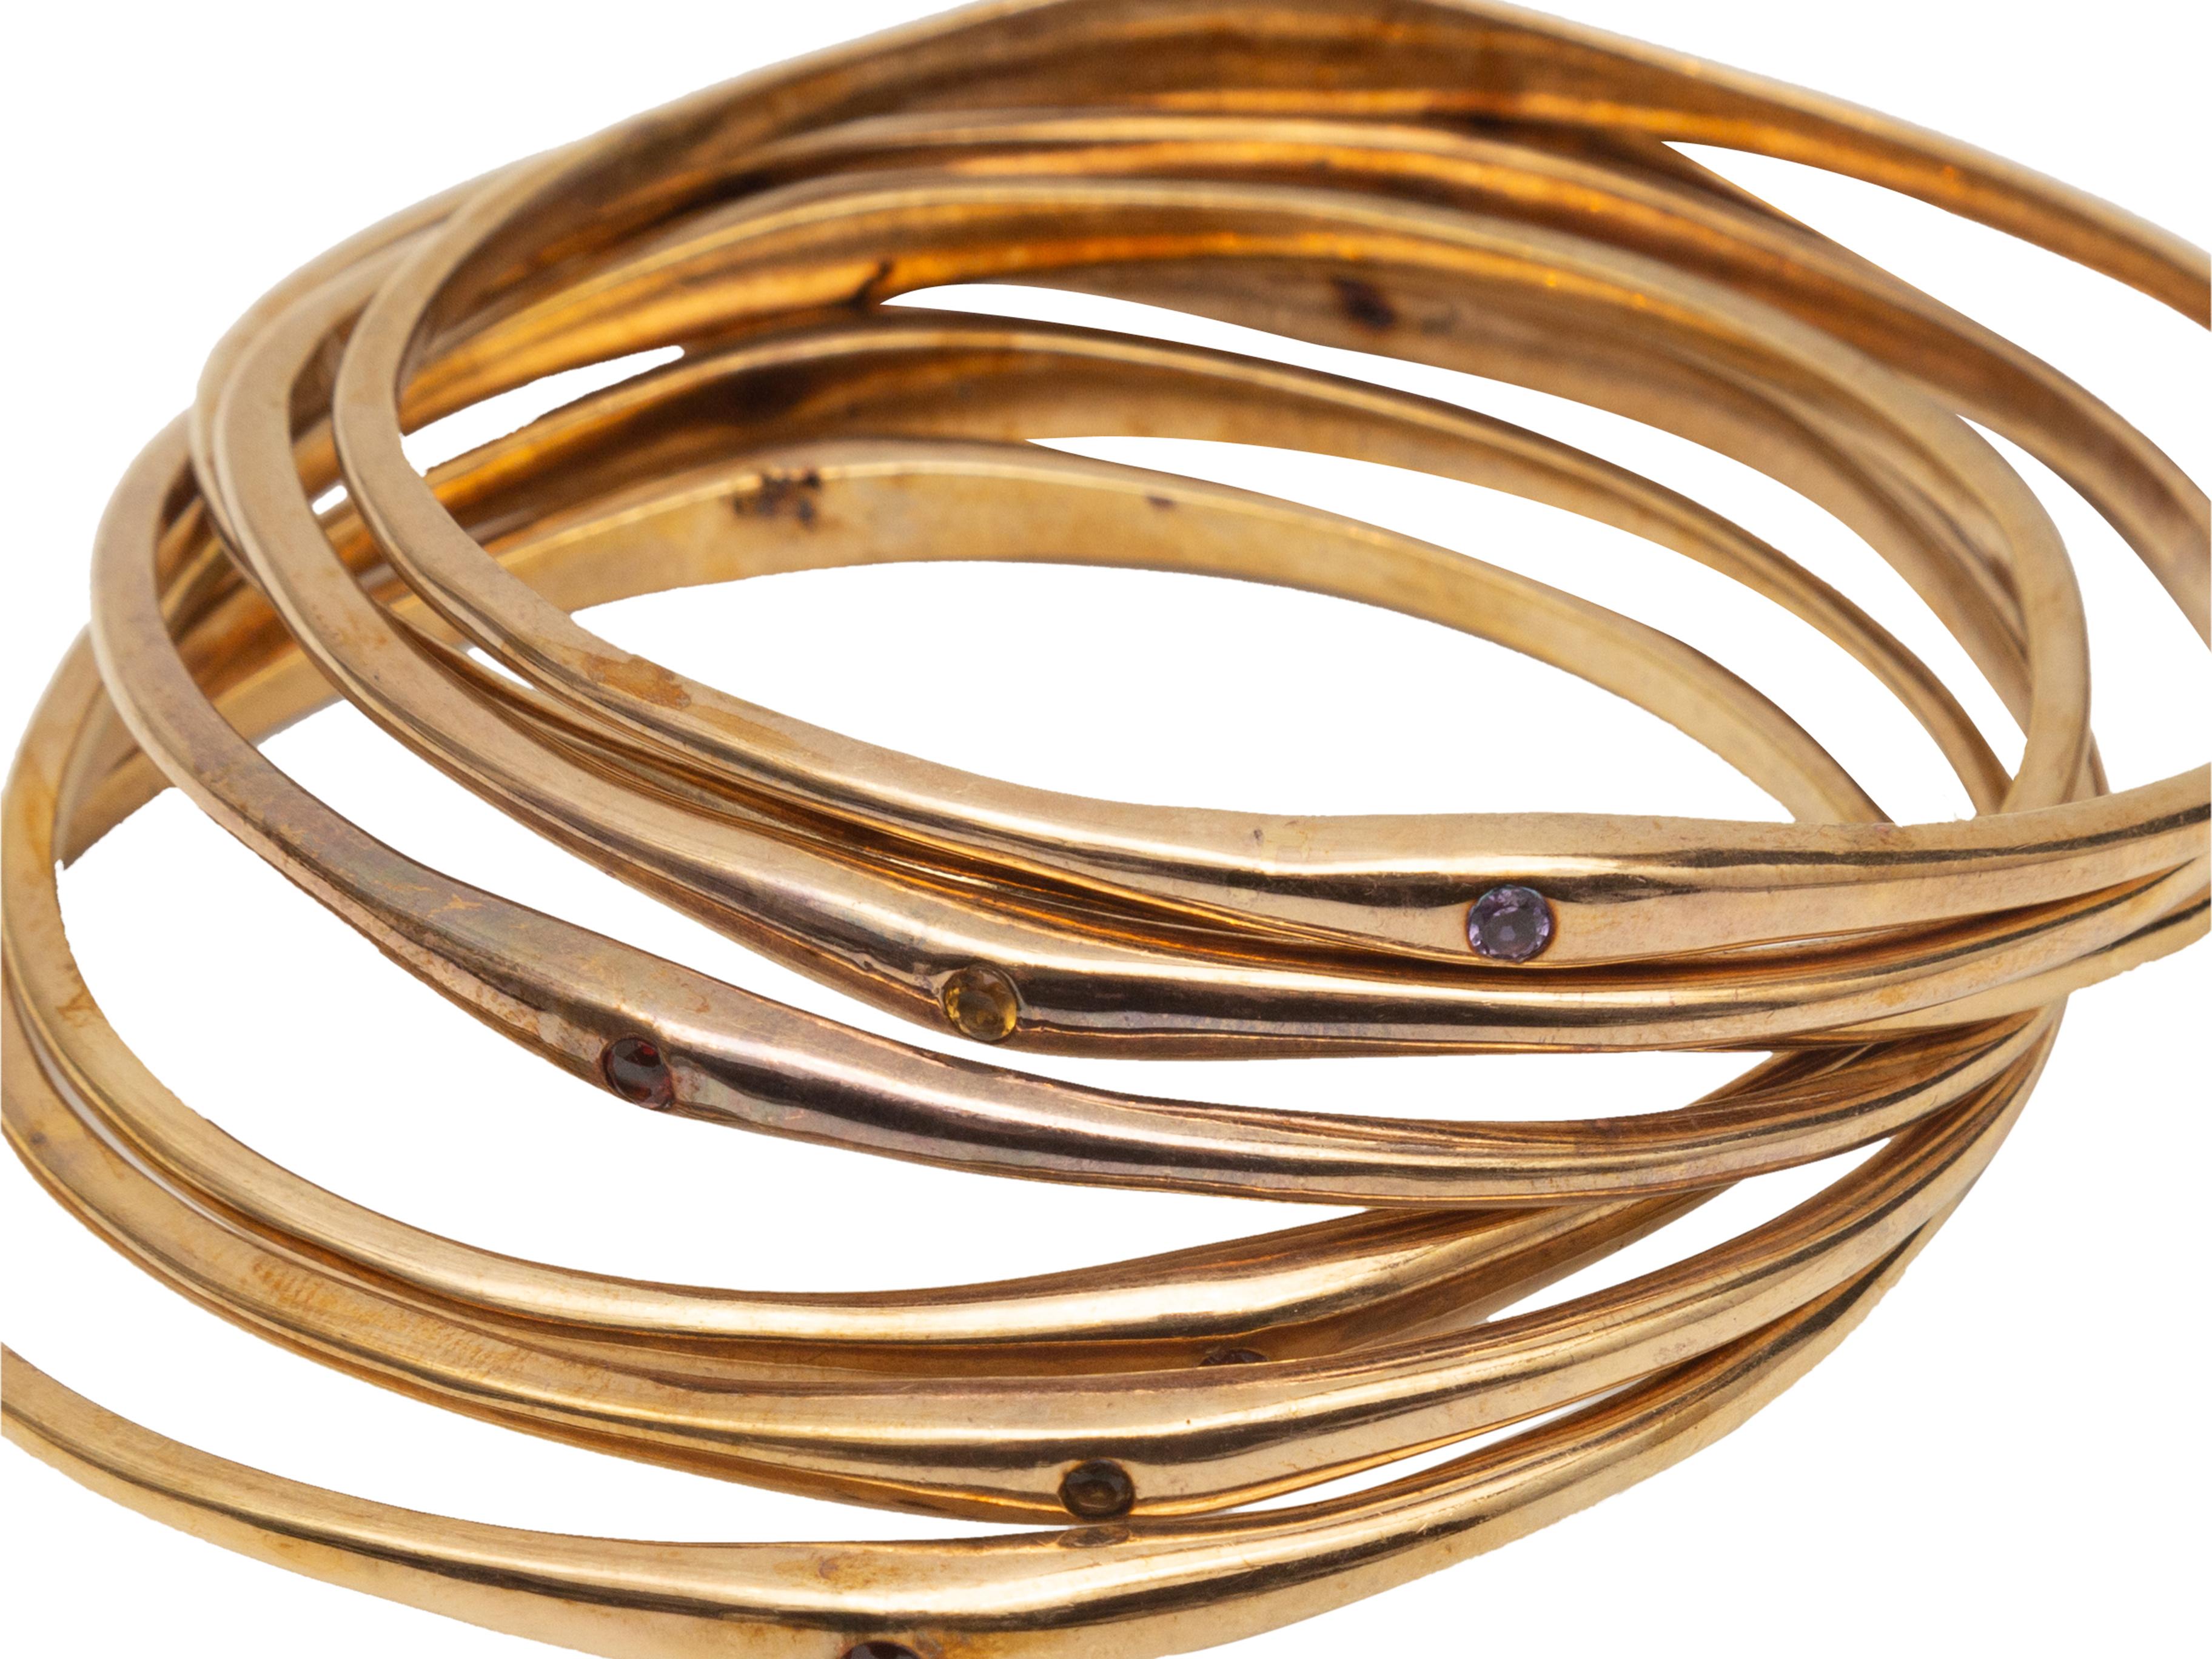 Product Details: Gold plated thin bangle bracelets with multicolor stones. Group of seven. 3